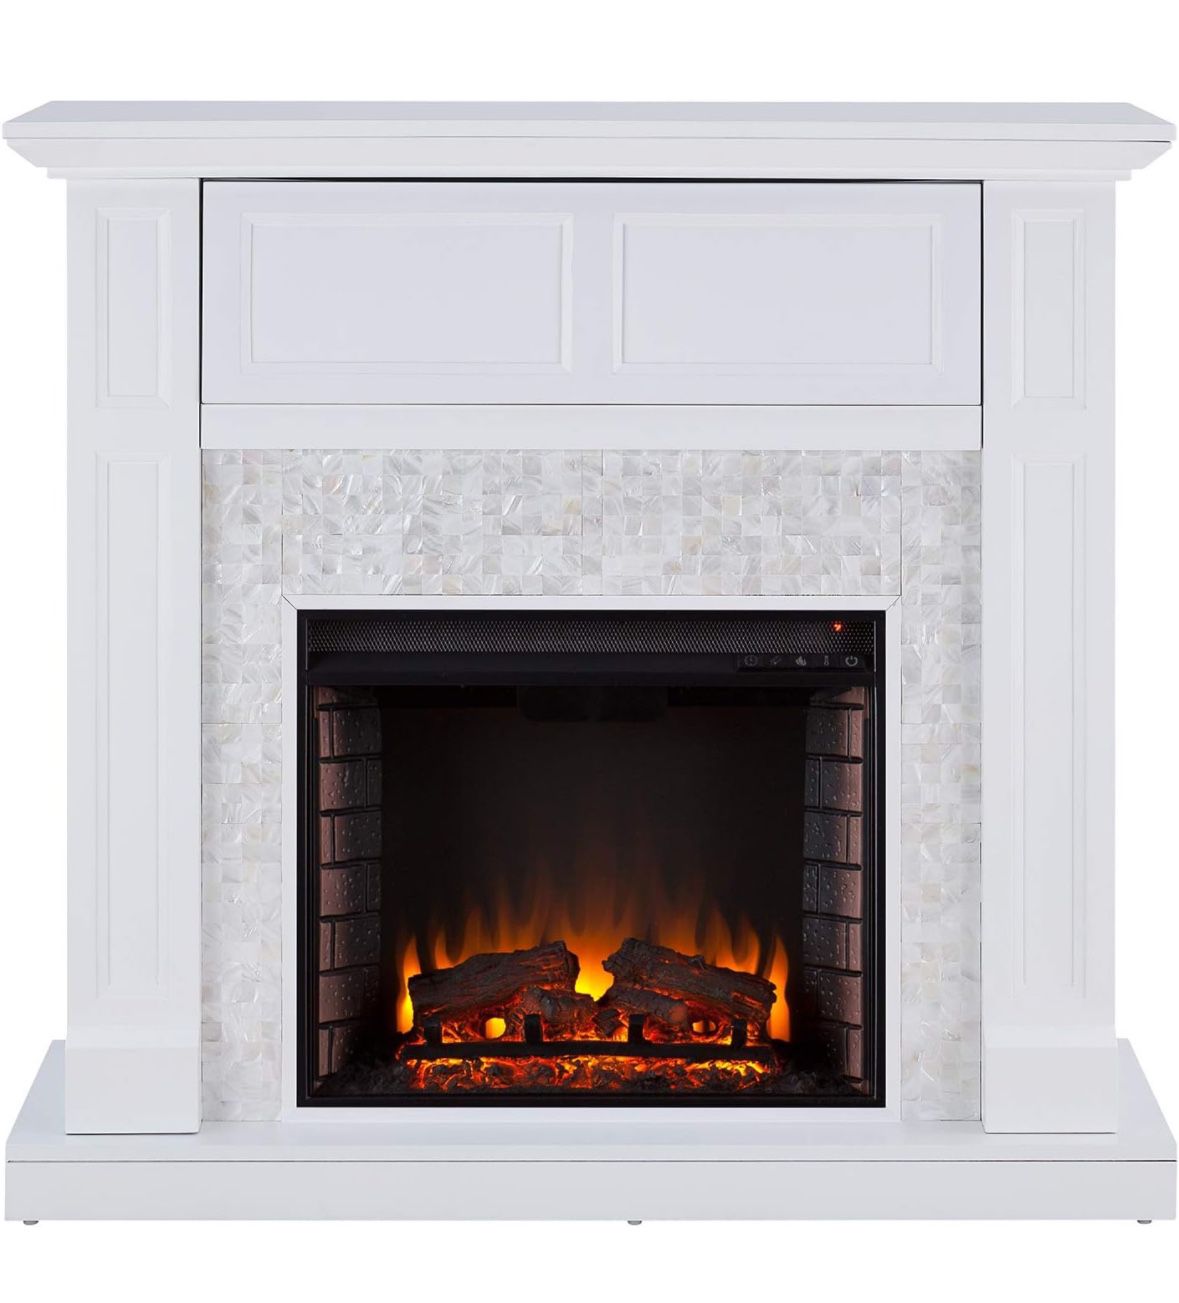 White Electric Fireplace With Hidden Media Shelf And Mother Of Pearl Tiles